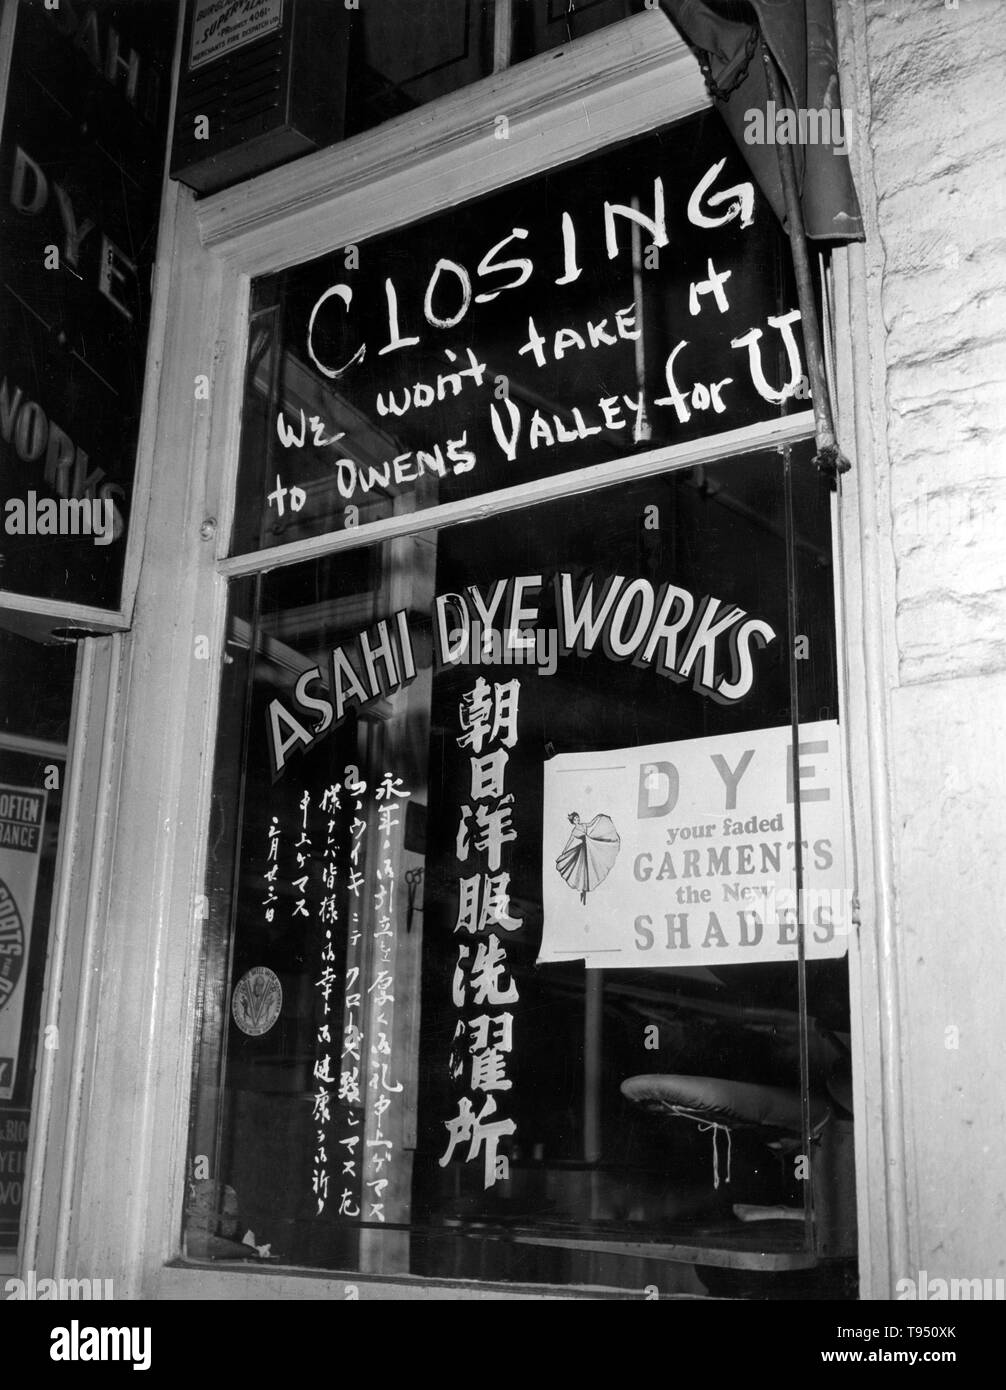 Entitled: 'Shop window of Asahi Dye Works with sign reading: 'Closing, we won't take it to Owens Valley for U', Little Tokyo, Los Angeles. The internment of Japanese-Americans during WWII was the forced relocation and incarceration in camps of 110,000-120,000 people of Japanese ancestry (62% of the internees were US citizens) ordered by President Roosevelt shortly after Japan's attack on Pearl Harbor. Stock Photo